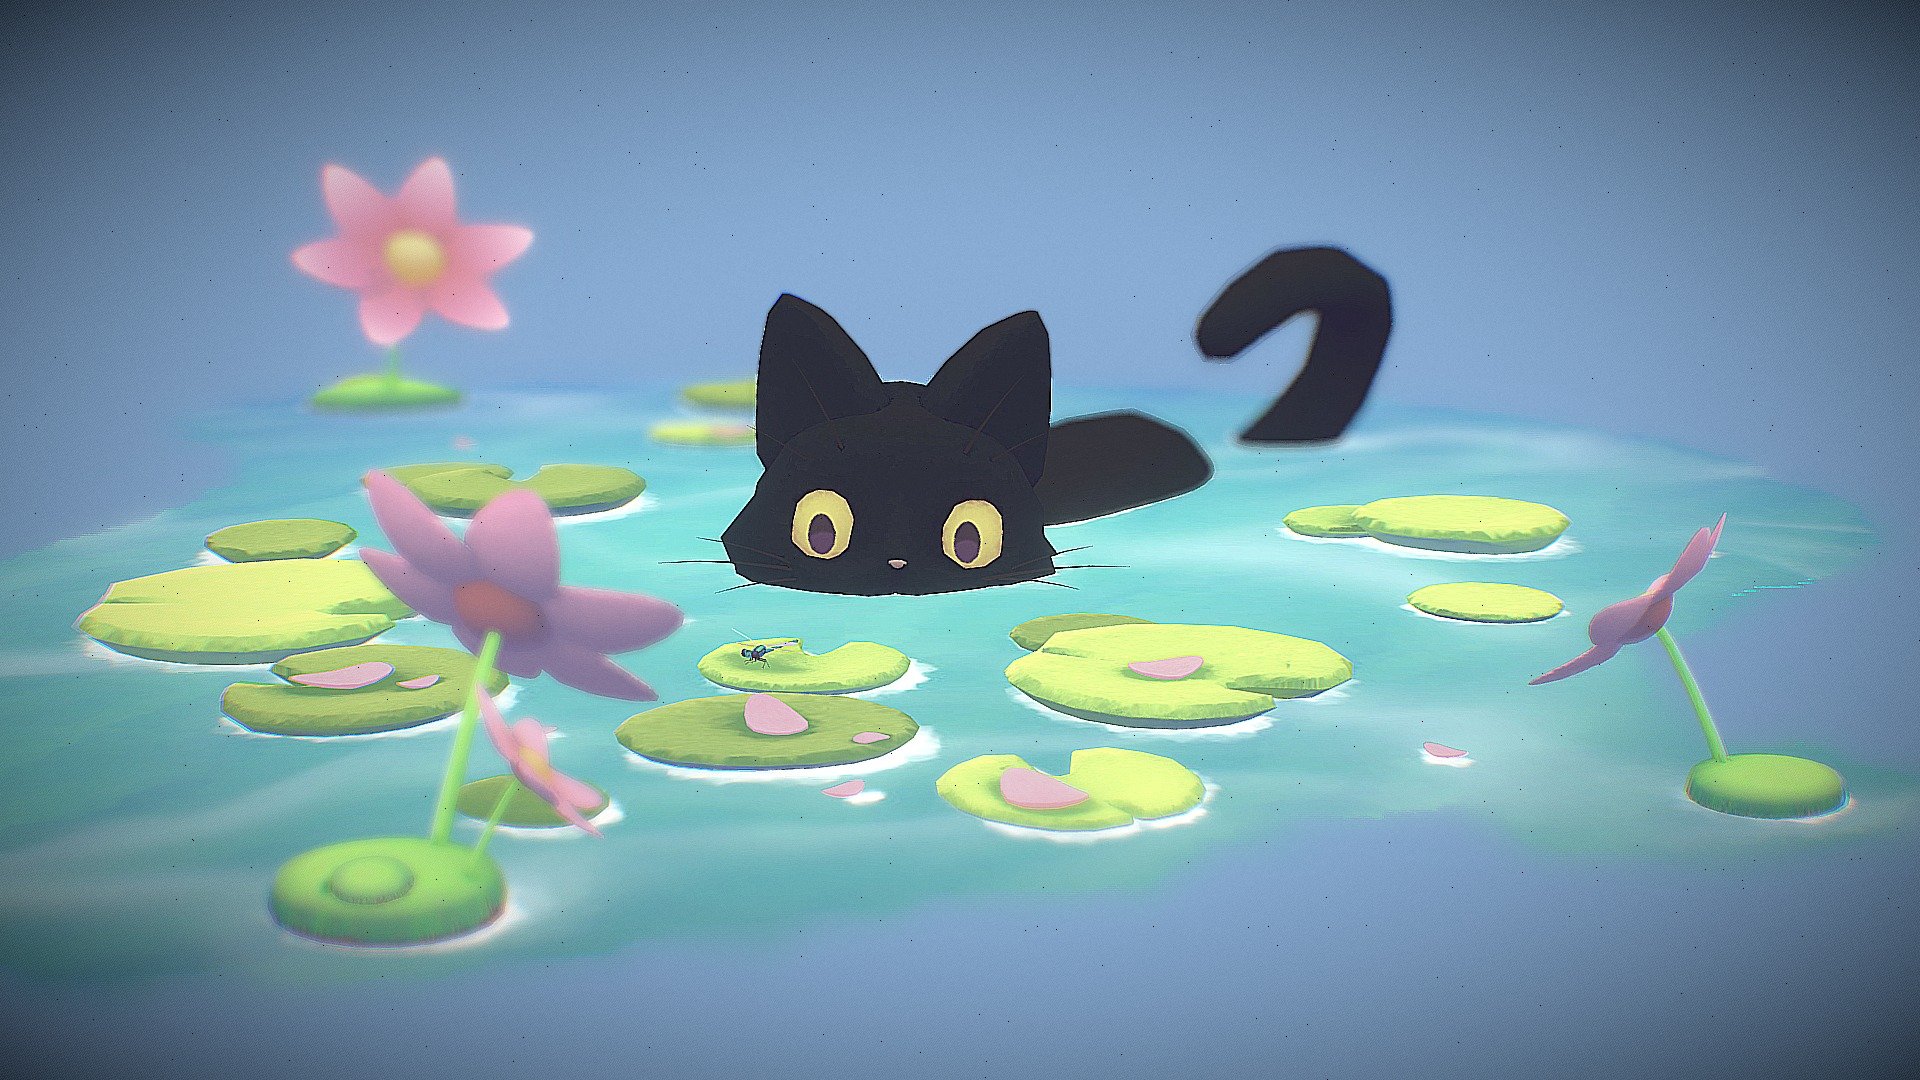 Just a cat hunting a dragonfly.
reference 2D: https://www.instagram.com/lumasi.png/ - Hunting - 3D model by Sinkey 3d model